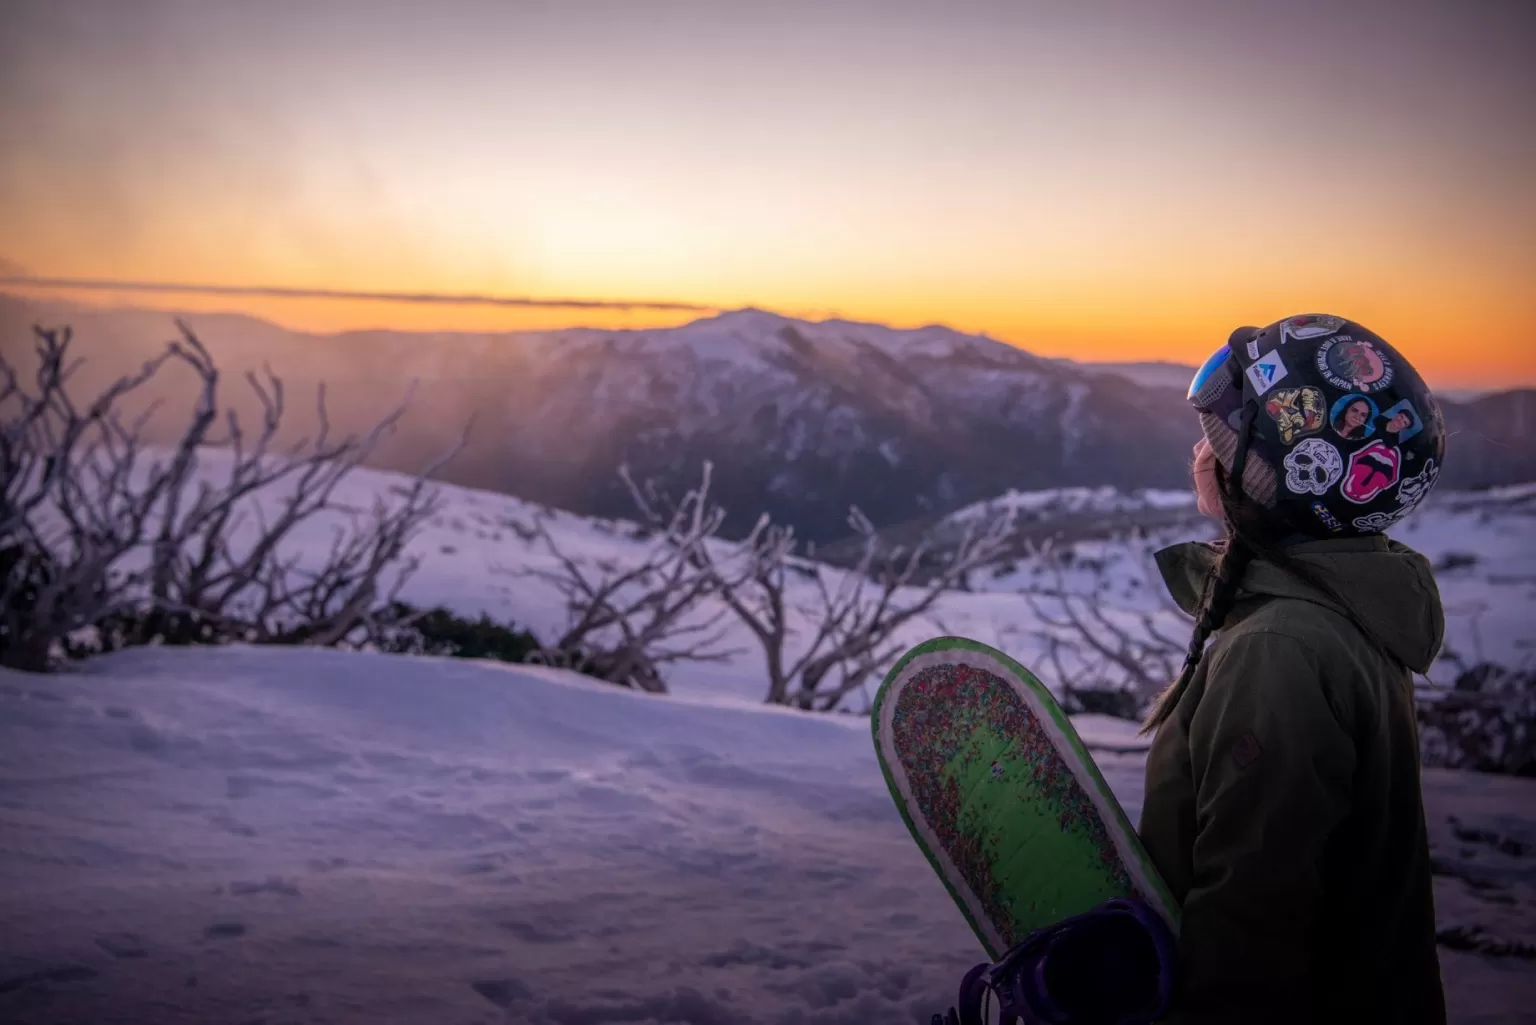 Falls Creek closes early for the 2023 season this Wednesday image